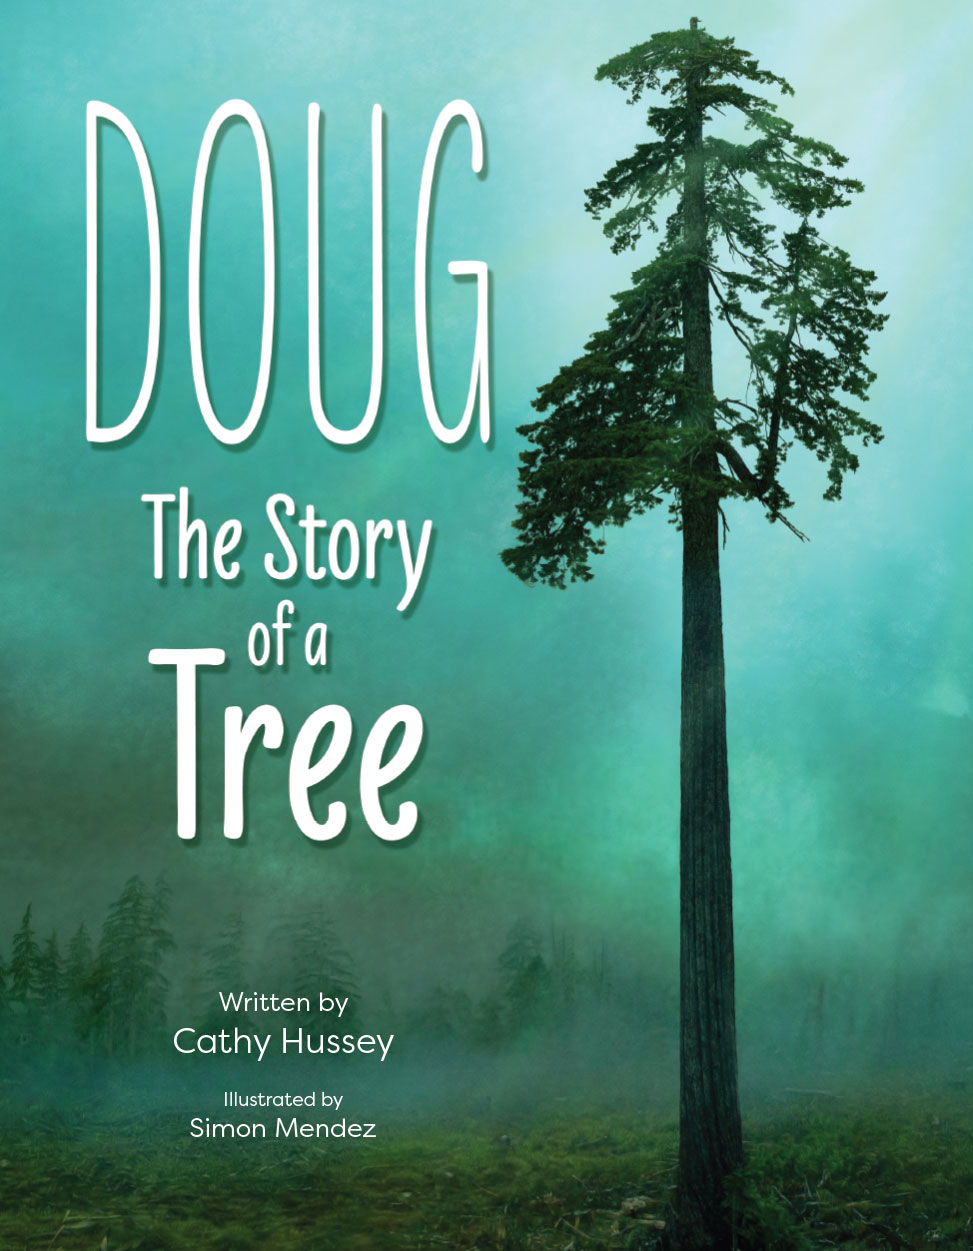 Doug: The Story of a Tree by Cathy Hussey Book Cover